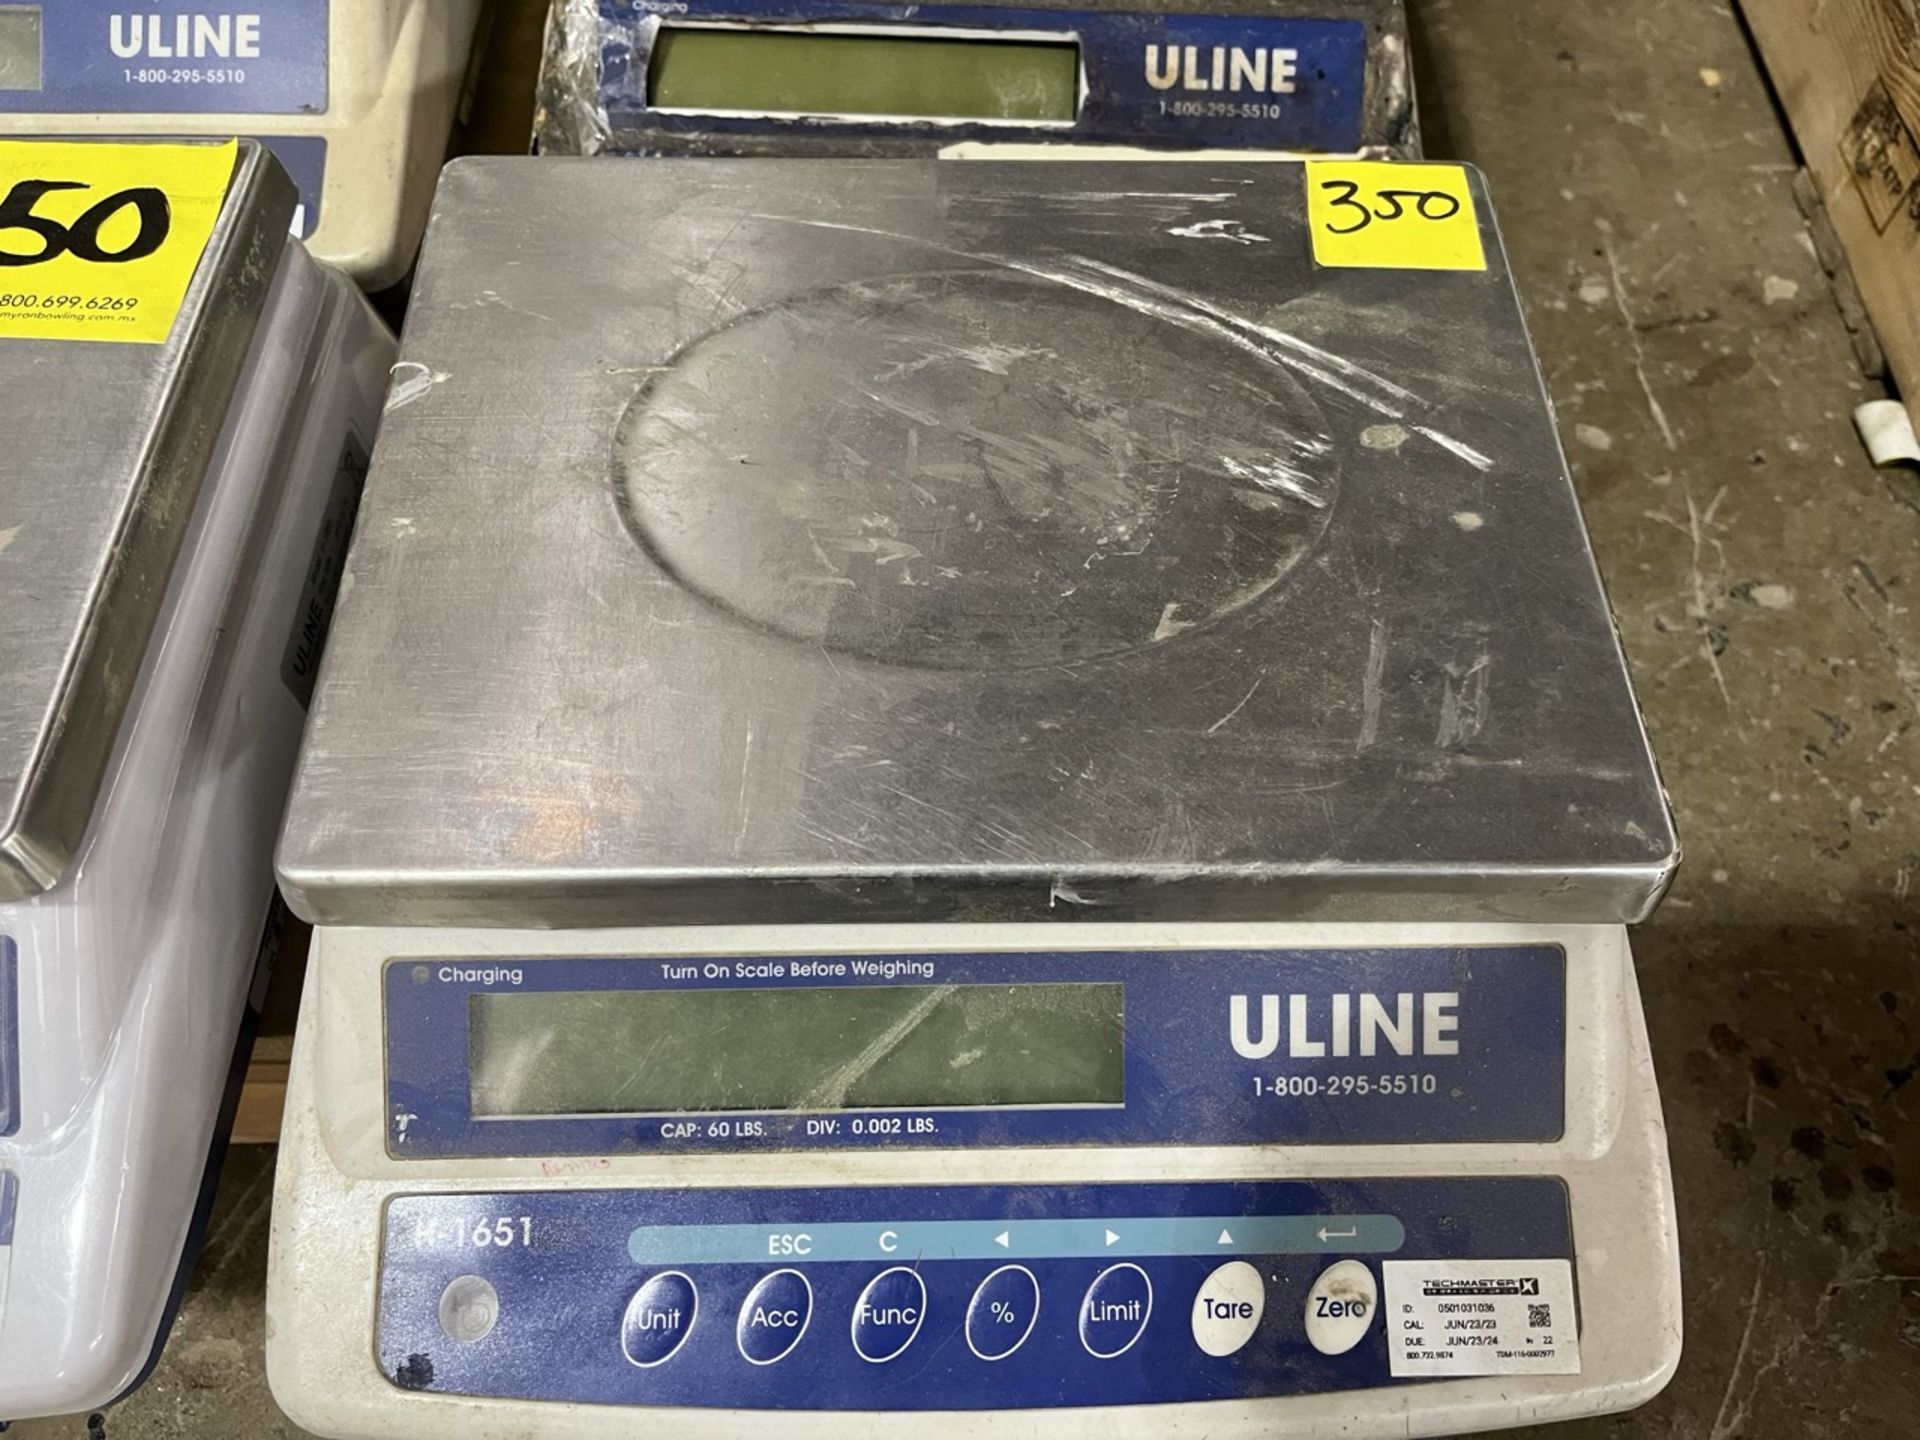 Lot of 4 pieces contains: 3 Uline Precision Electronic Scales, model H-1651; 1 Uline Precision Elec - Image 6 of 11